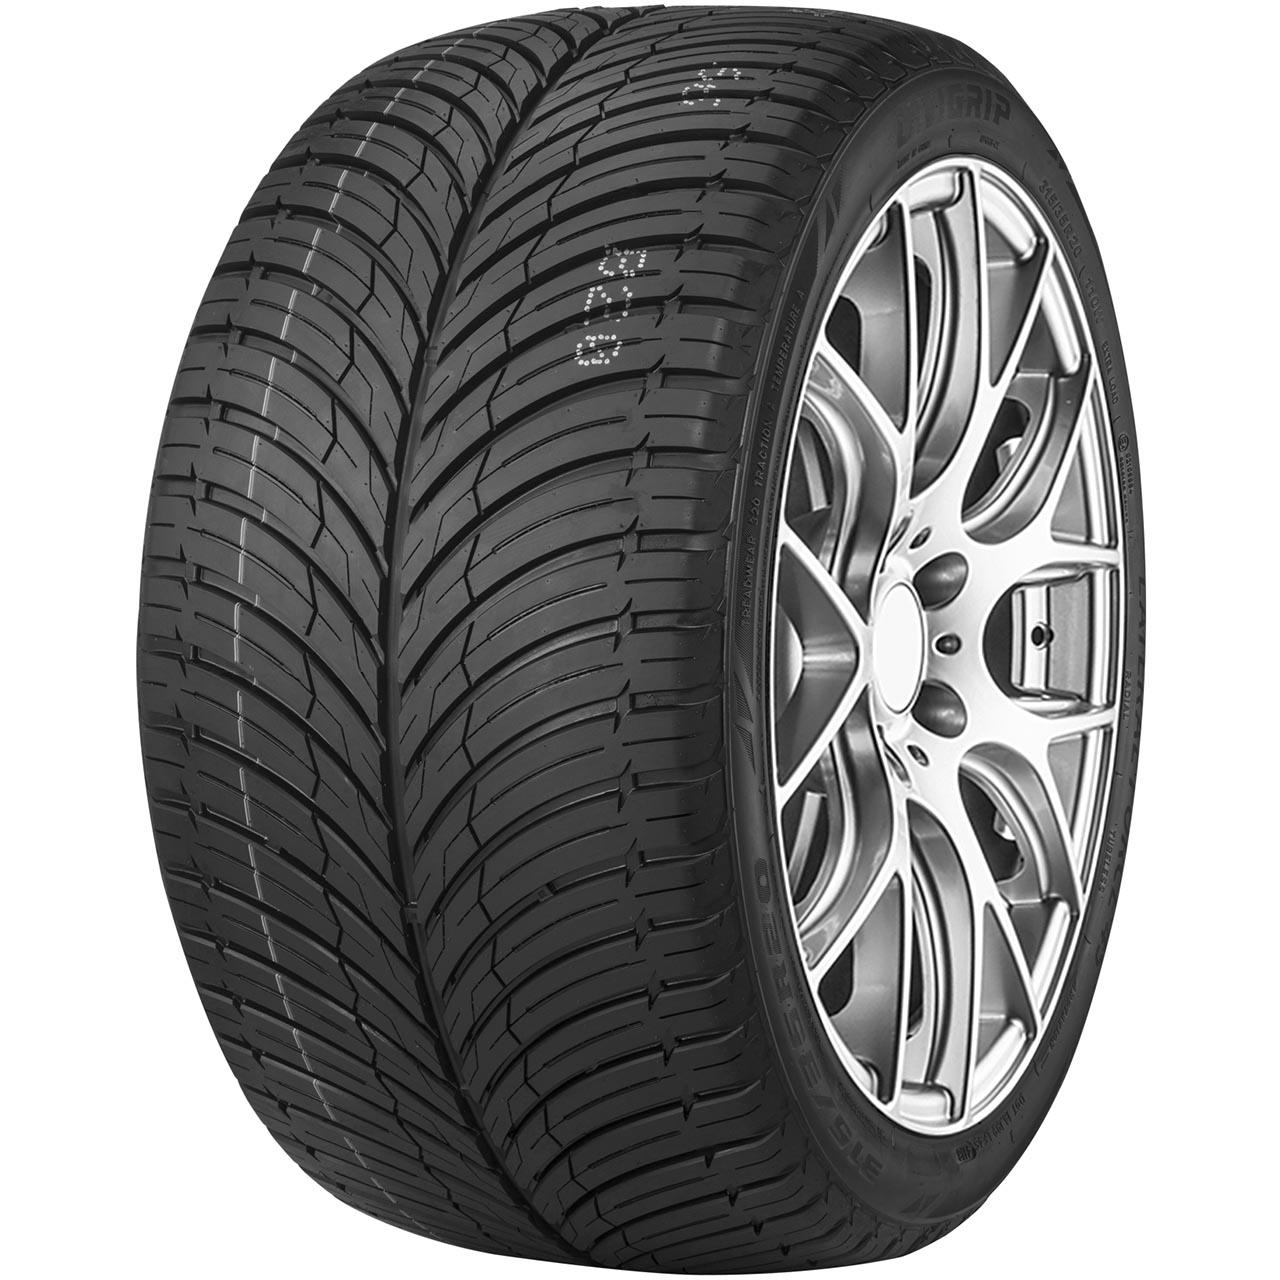 Unigrip Lateral Force 4S 255/60R17 110V XL